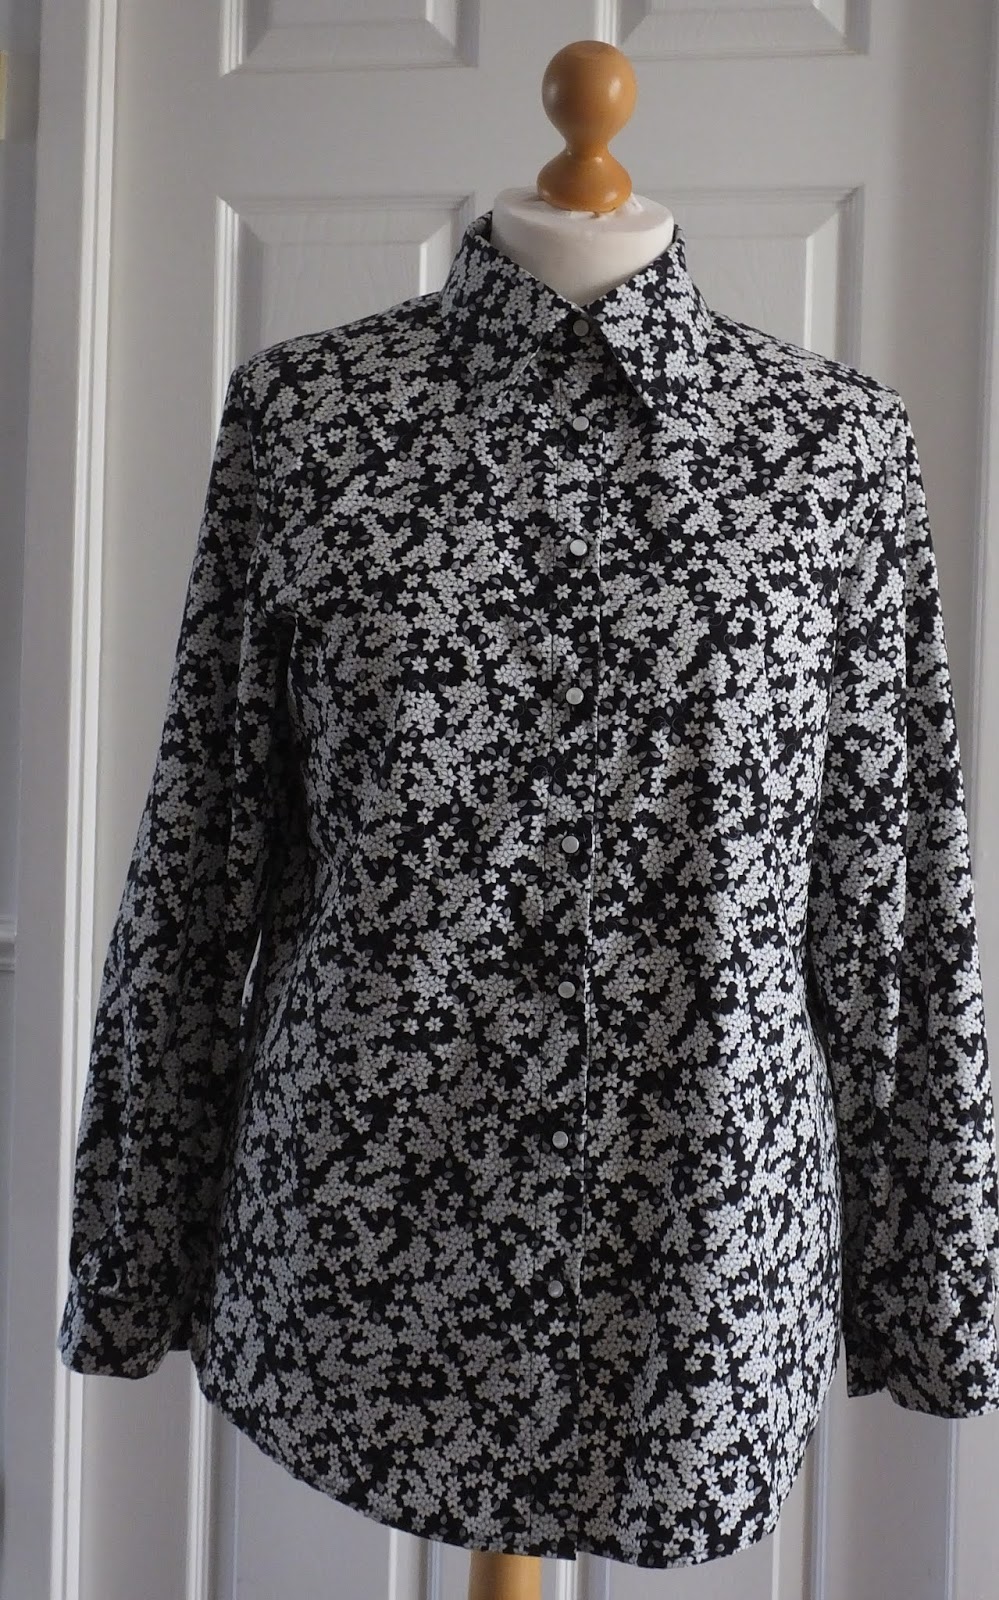 Sew Ruthie Style: Black floral shirt